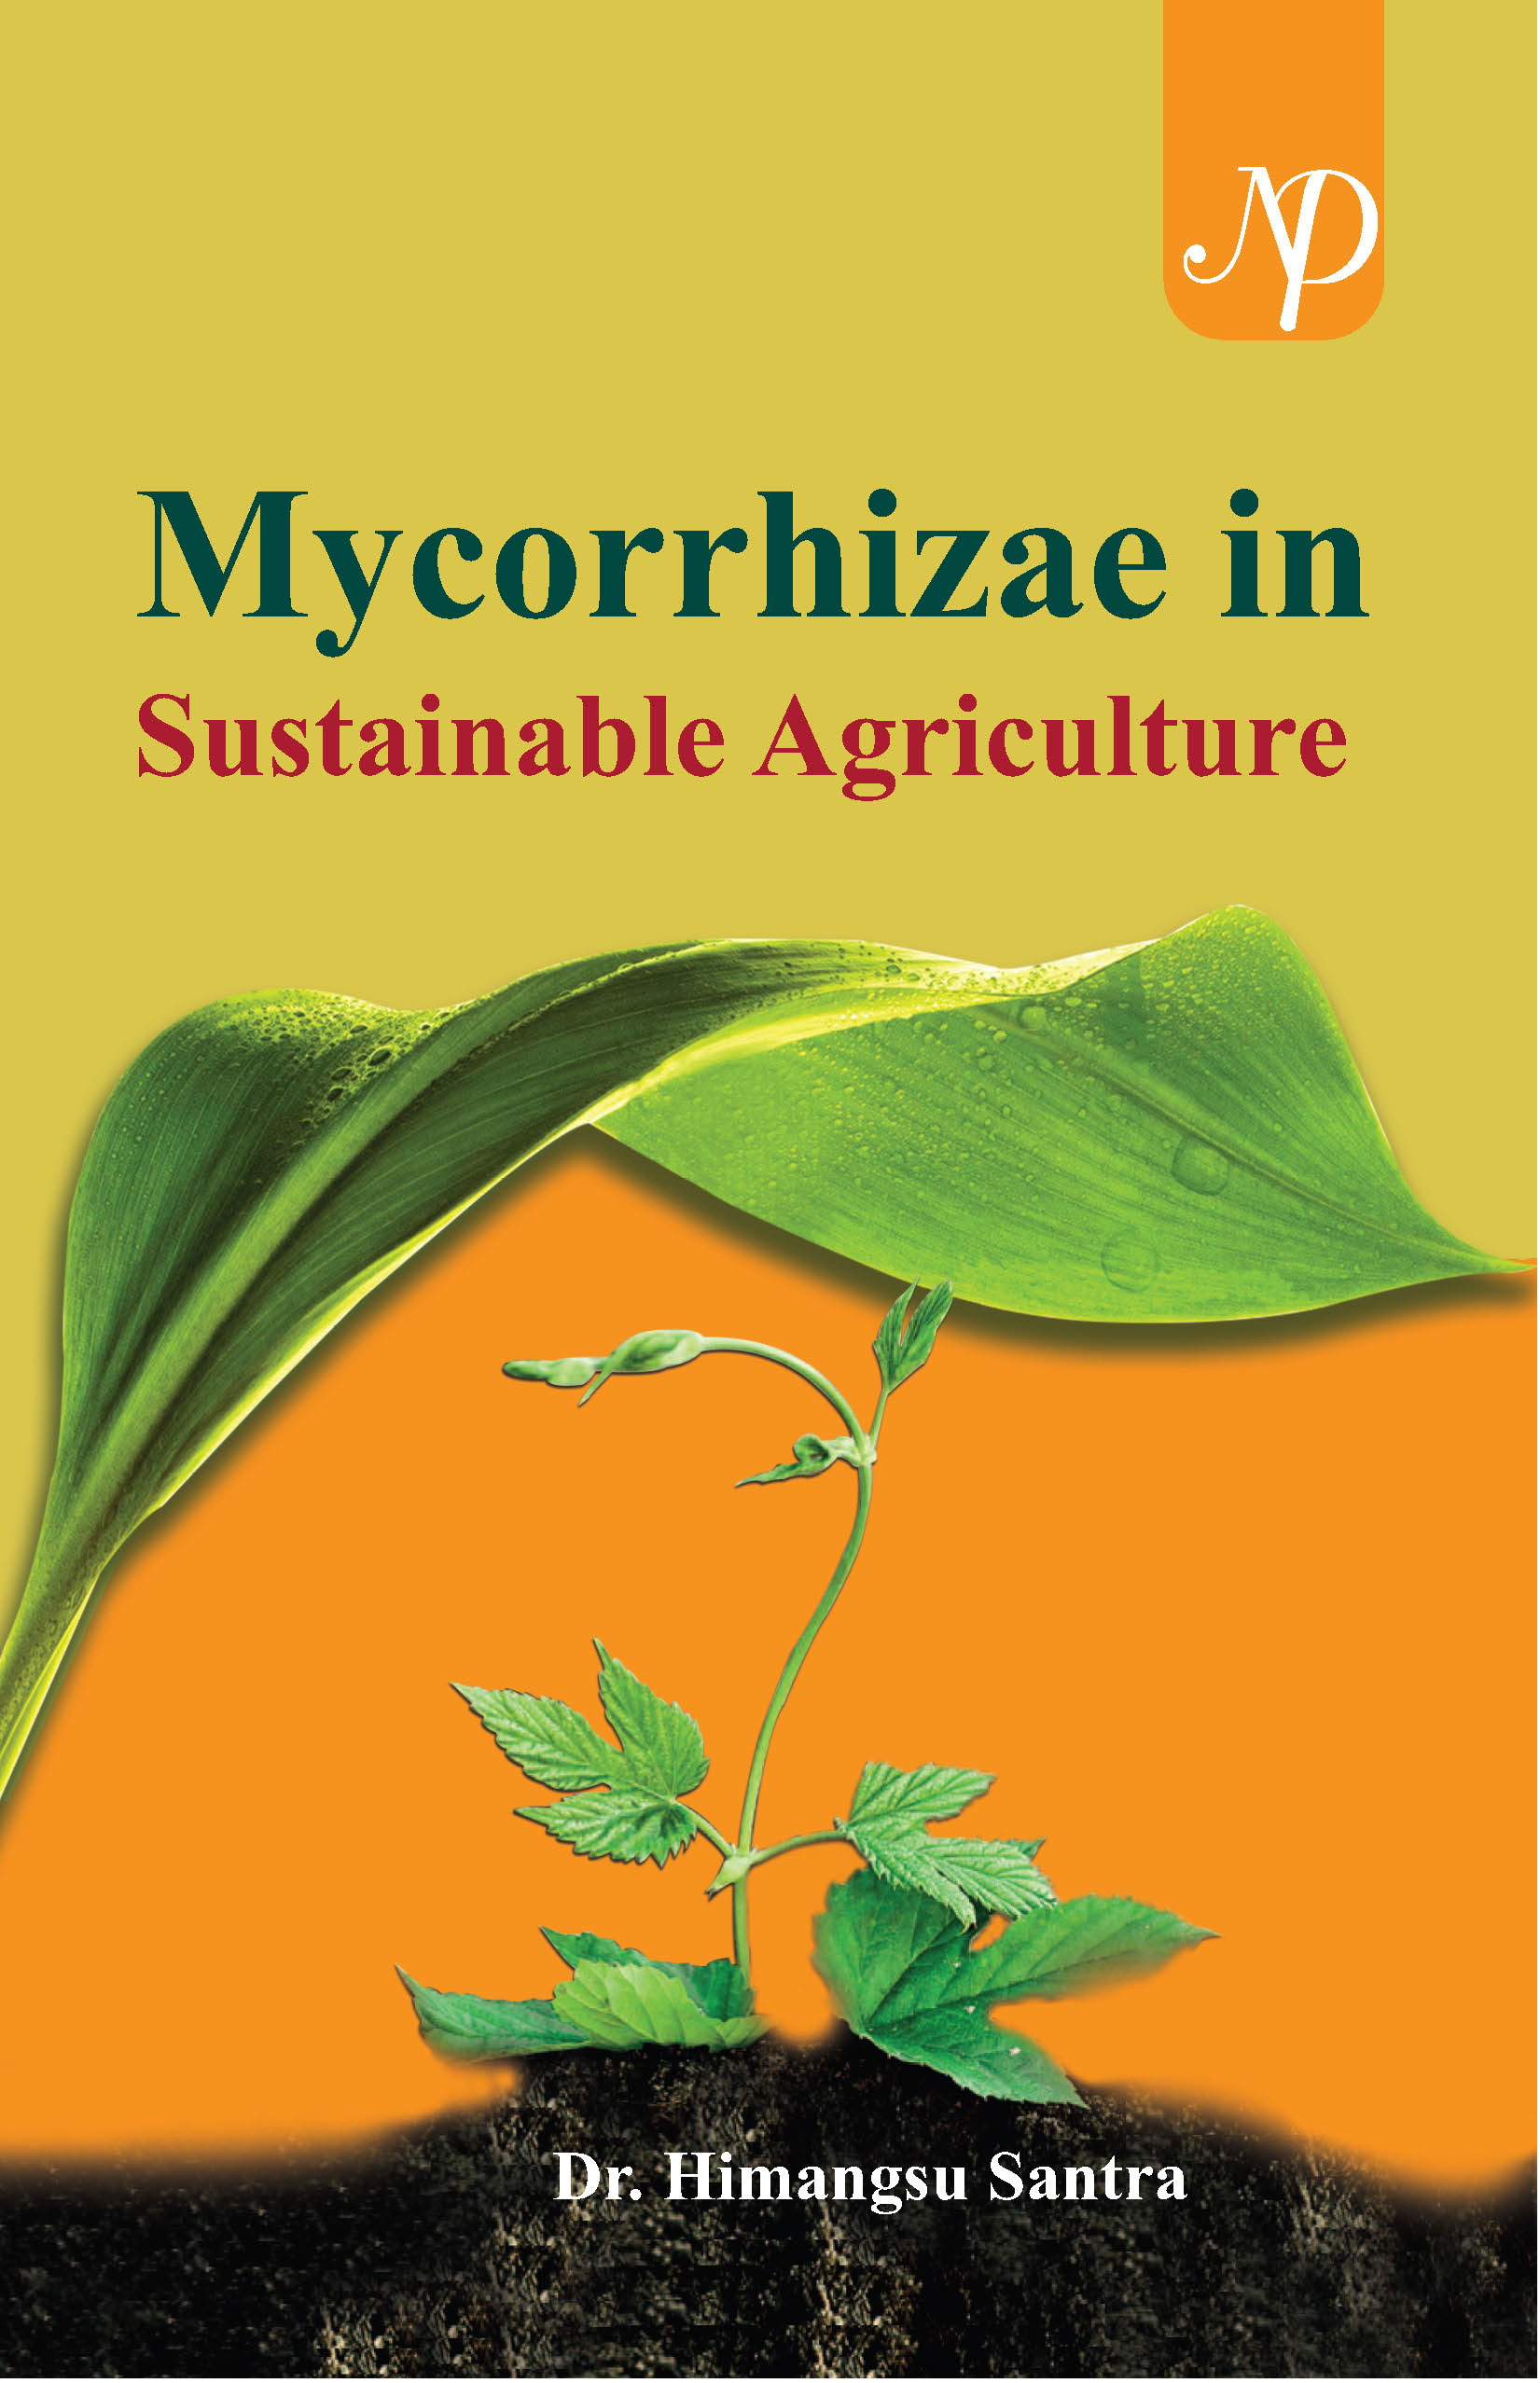 MYCORRHIZAE IN SUSTAINABLE AGRICULTURE cover.jpg